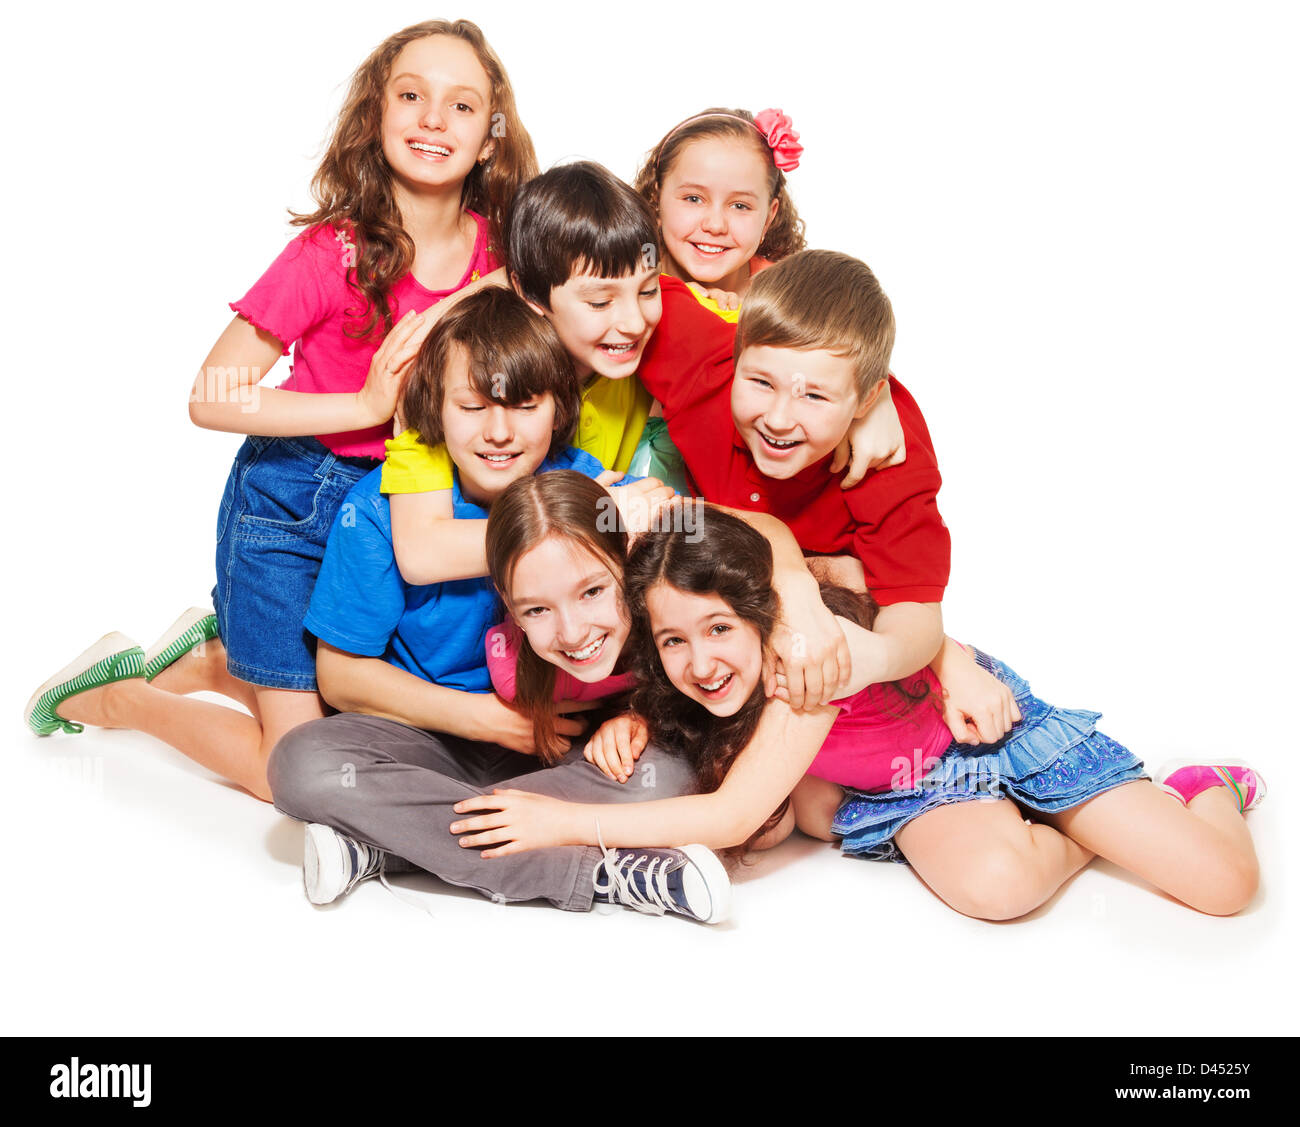 Group of happy kids - boys and girls sitting together, hugging, laughing Stock Photo